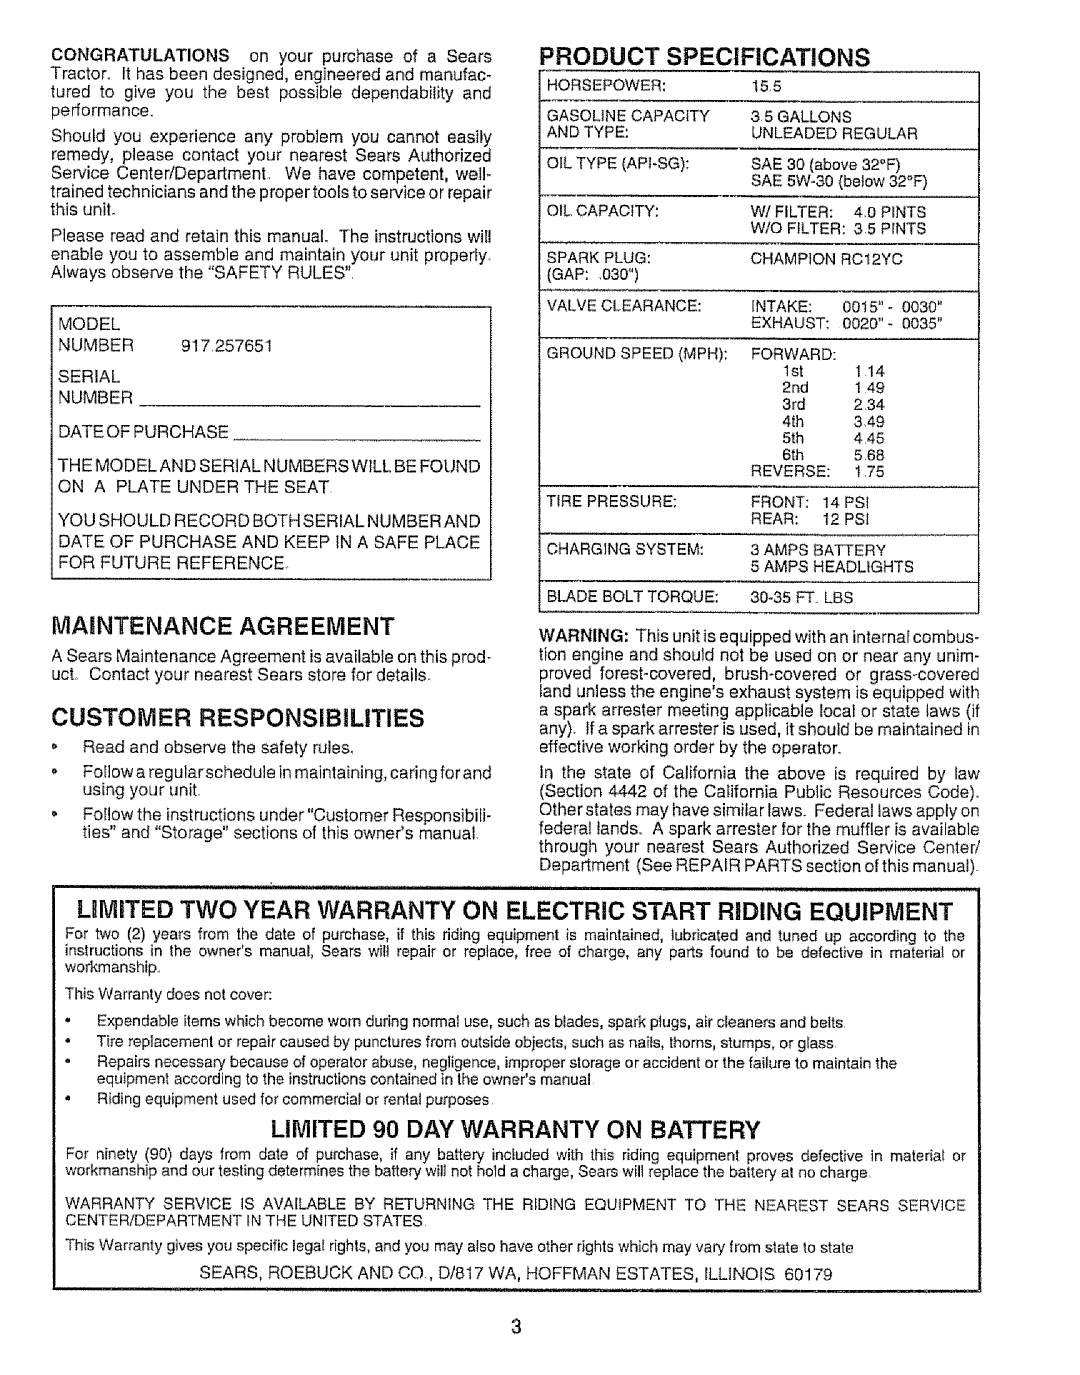 Sears 917.257651 owner manual Maintenance Agreement, Customer Responsibimties, PRODUCT SPECIFiCATiONS 